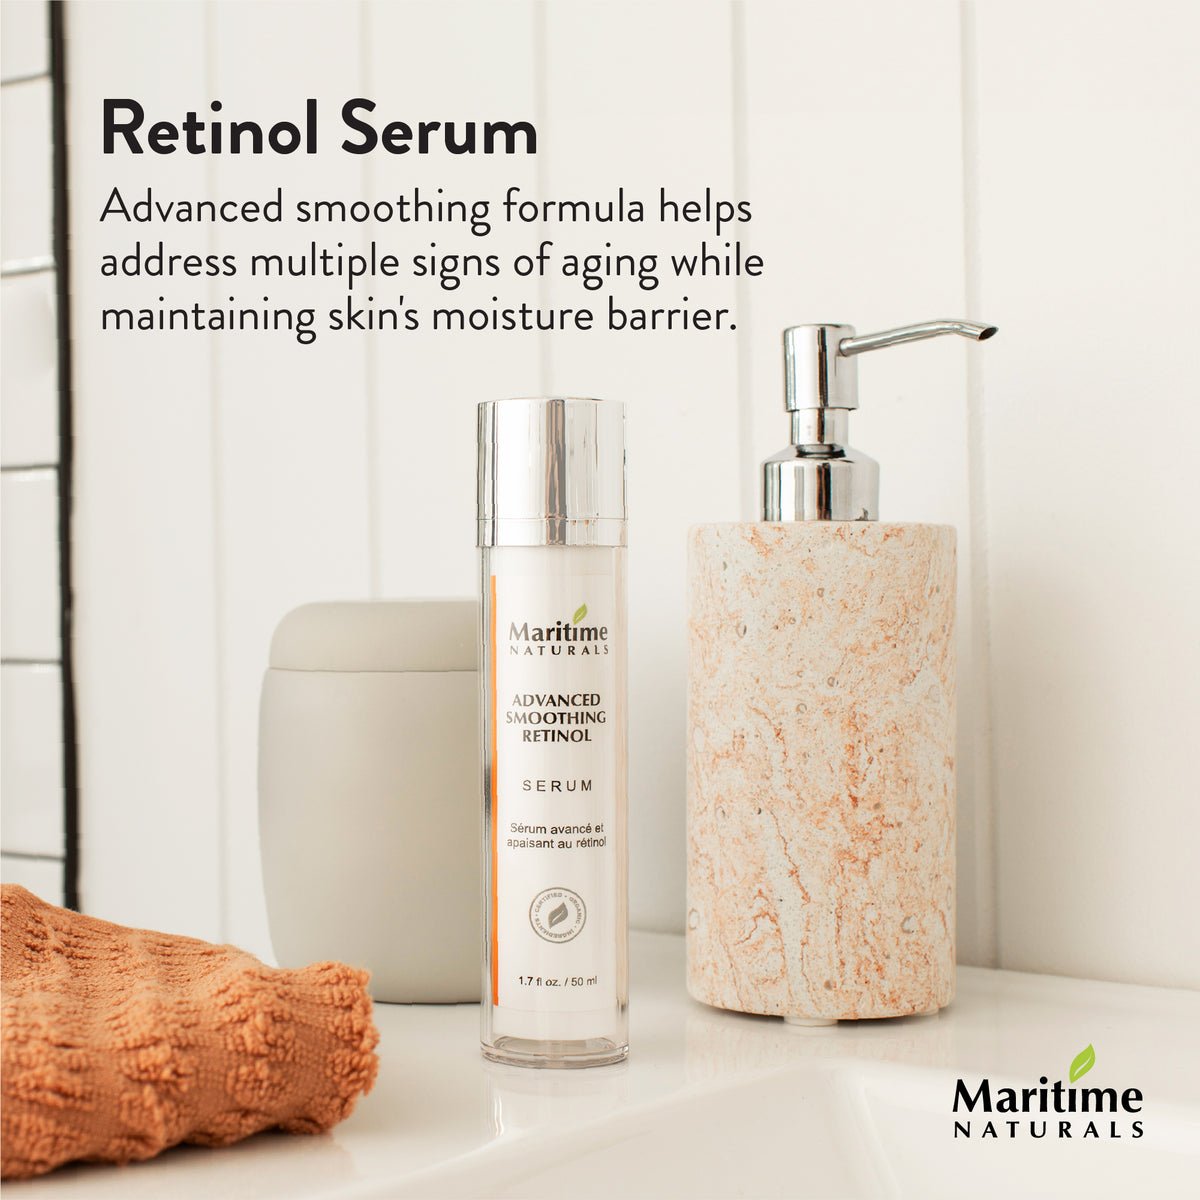 retinol serum for face helps address wrinkles and fine lines and plump and even skin tone